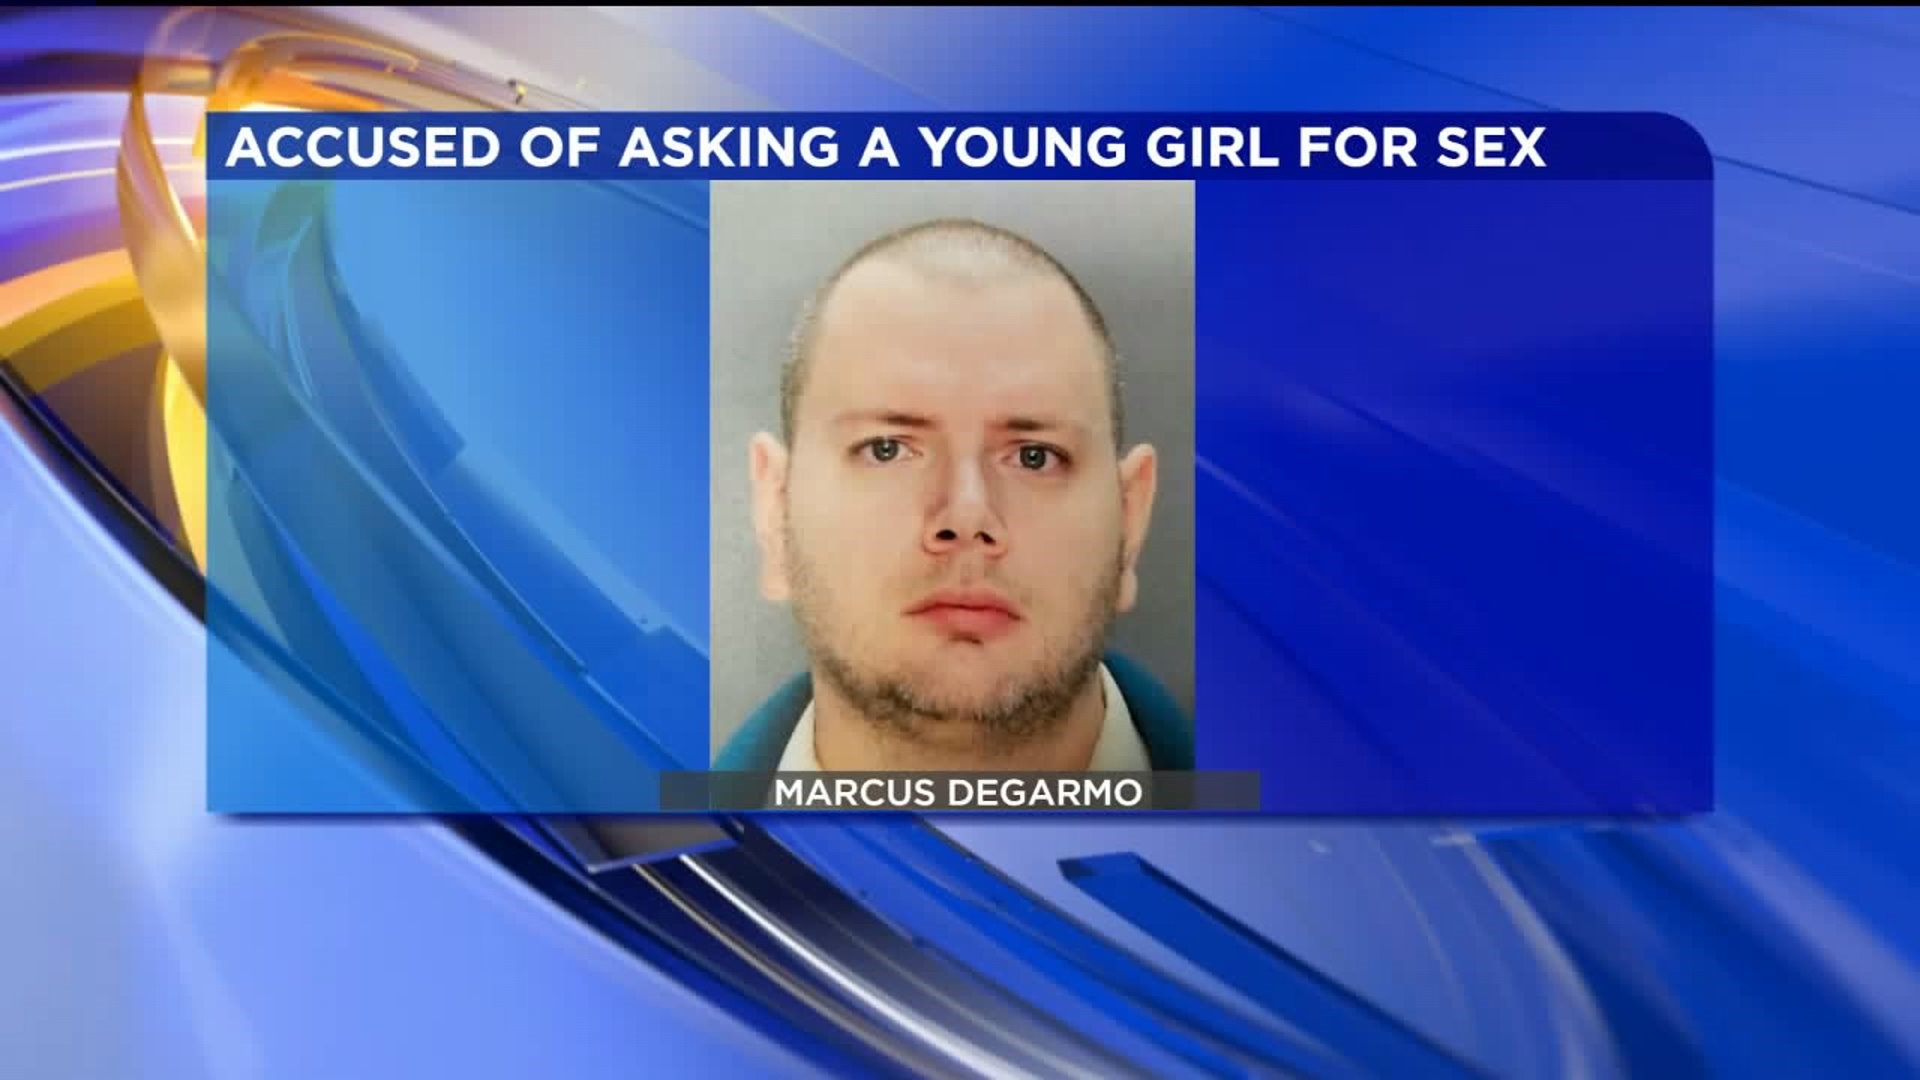 Man Accused of Asking 10-Year-Old Girl for Sex